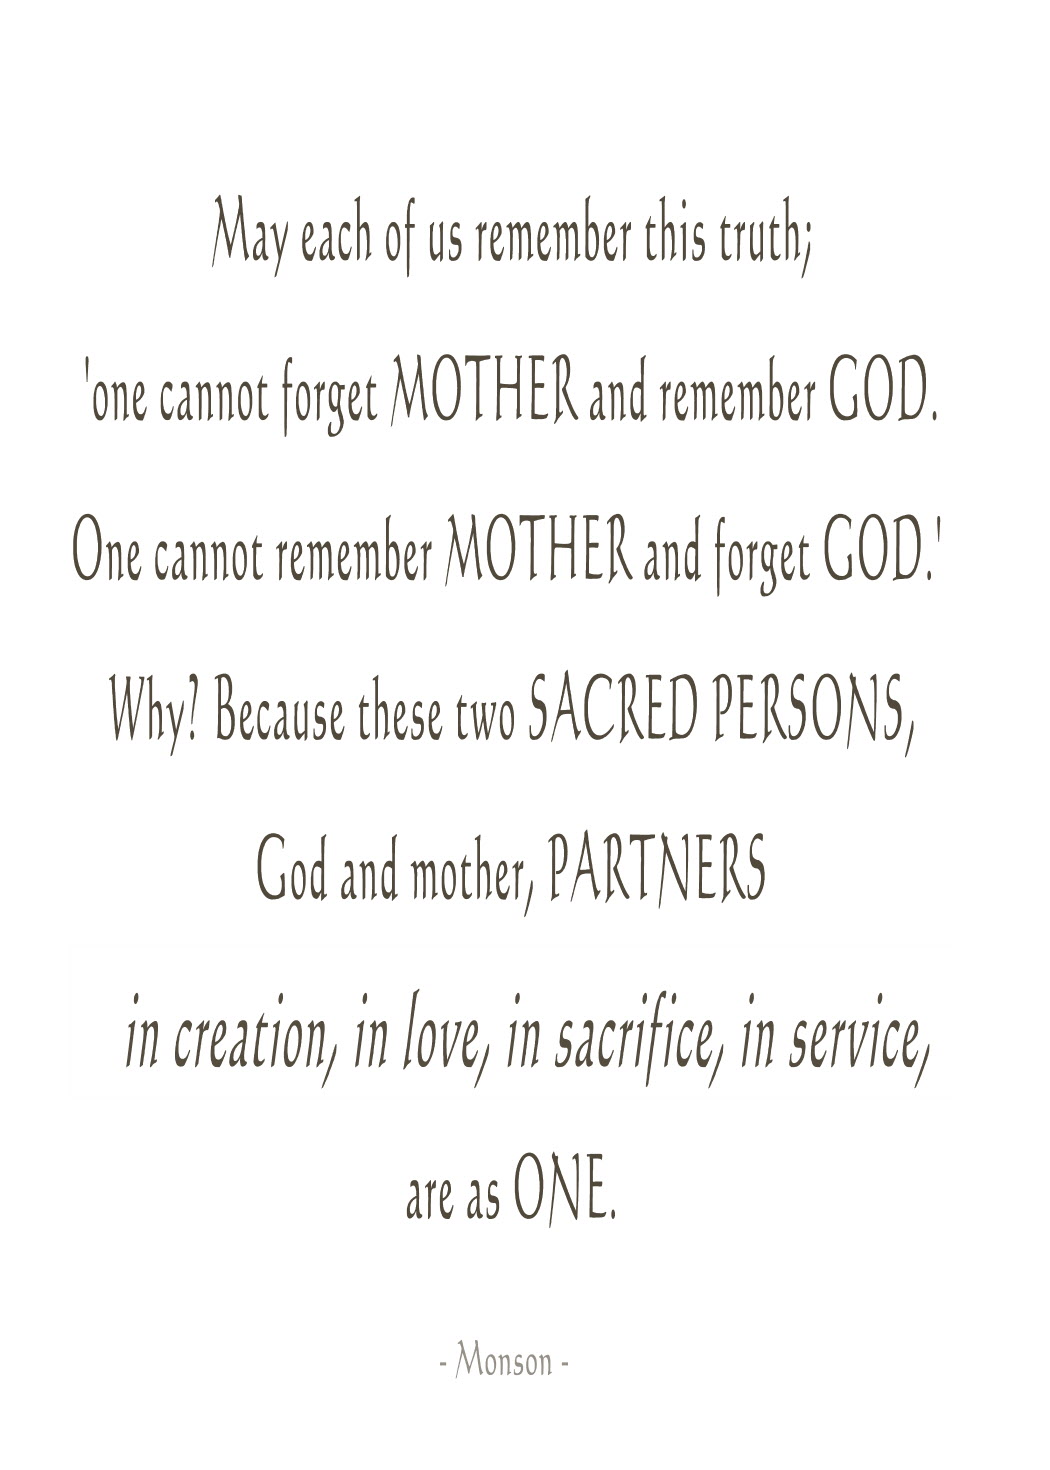 May each of us treasure this truth. One cannot forget mother and remember God. One cannot remember mother and forget God. Why1 Because these two sacred … Monson